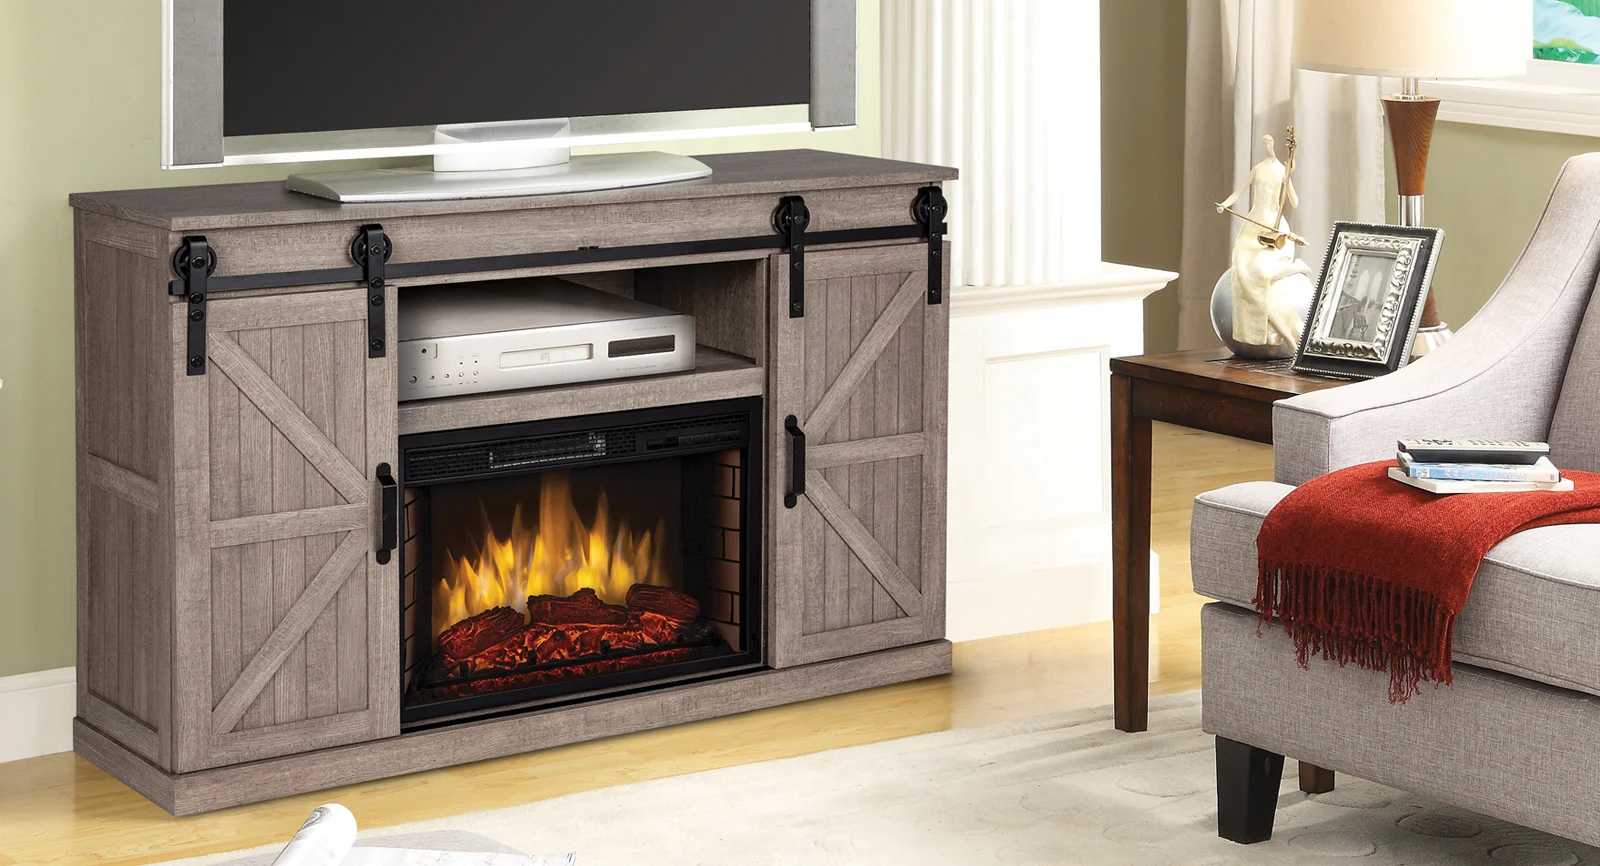 An electric fireplace